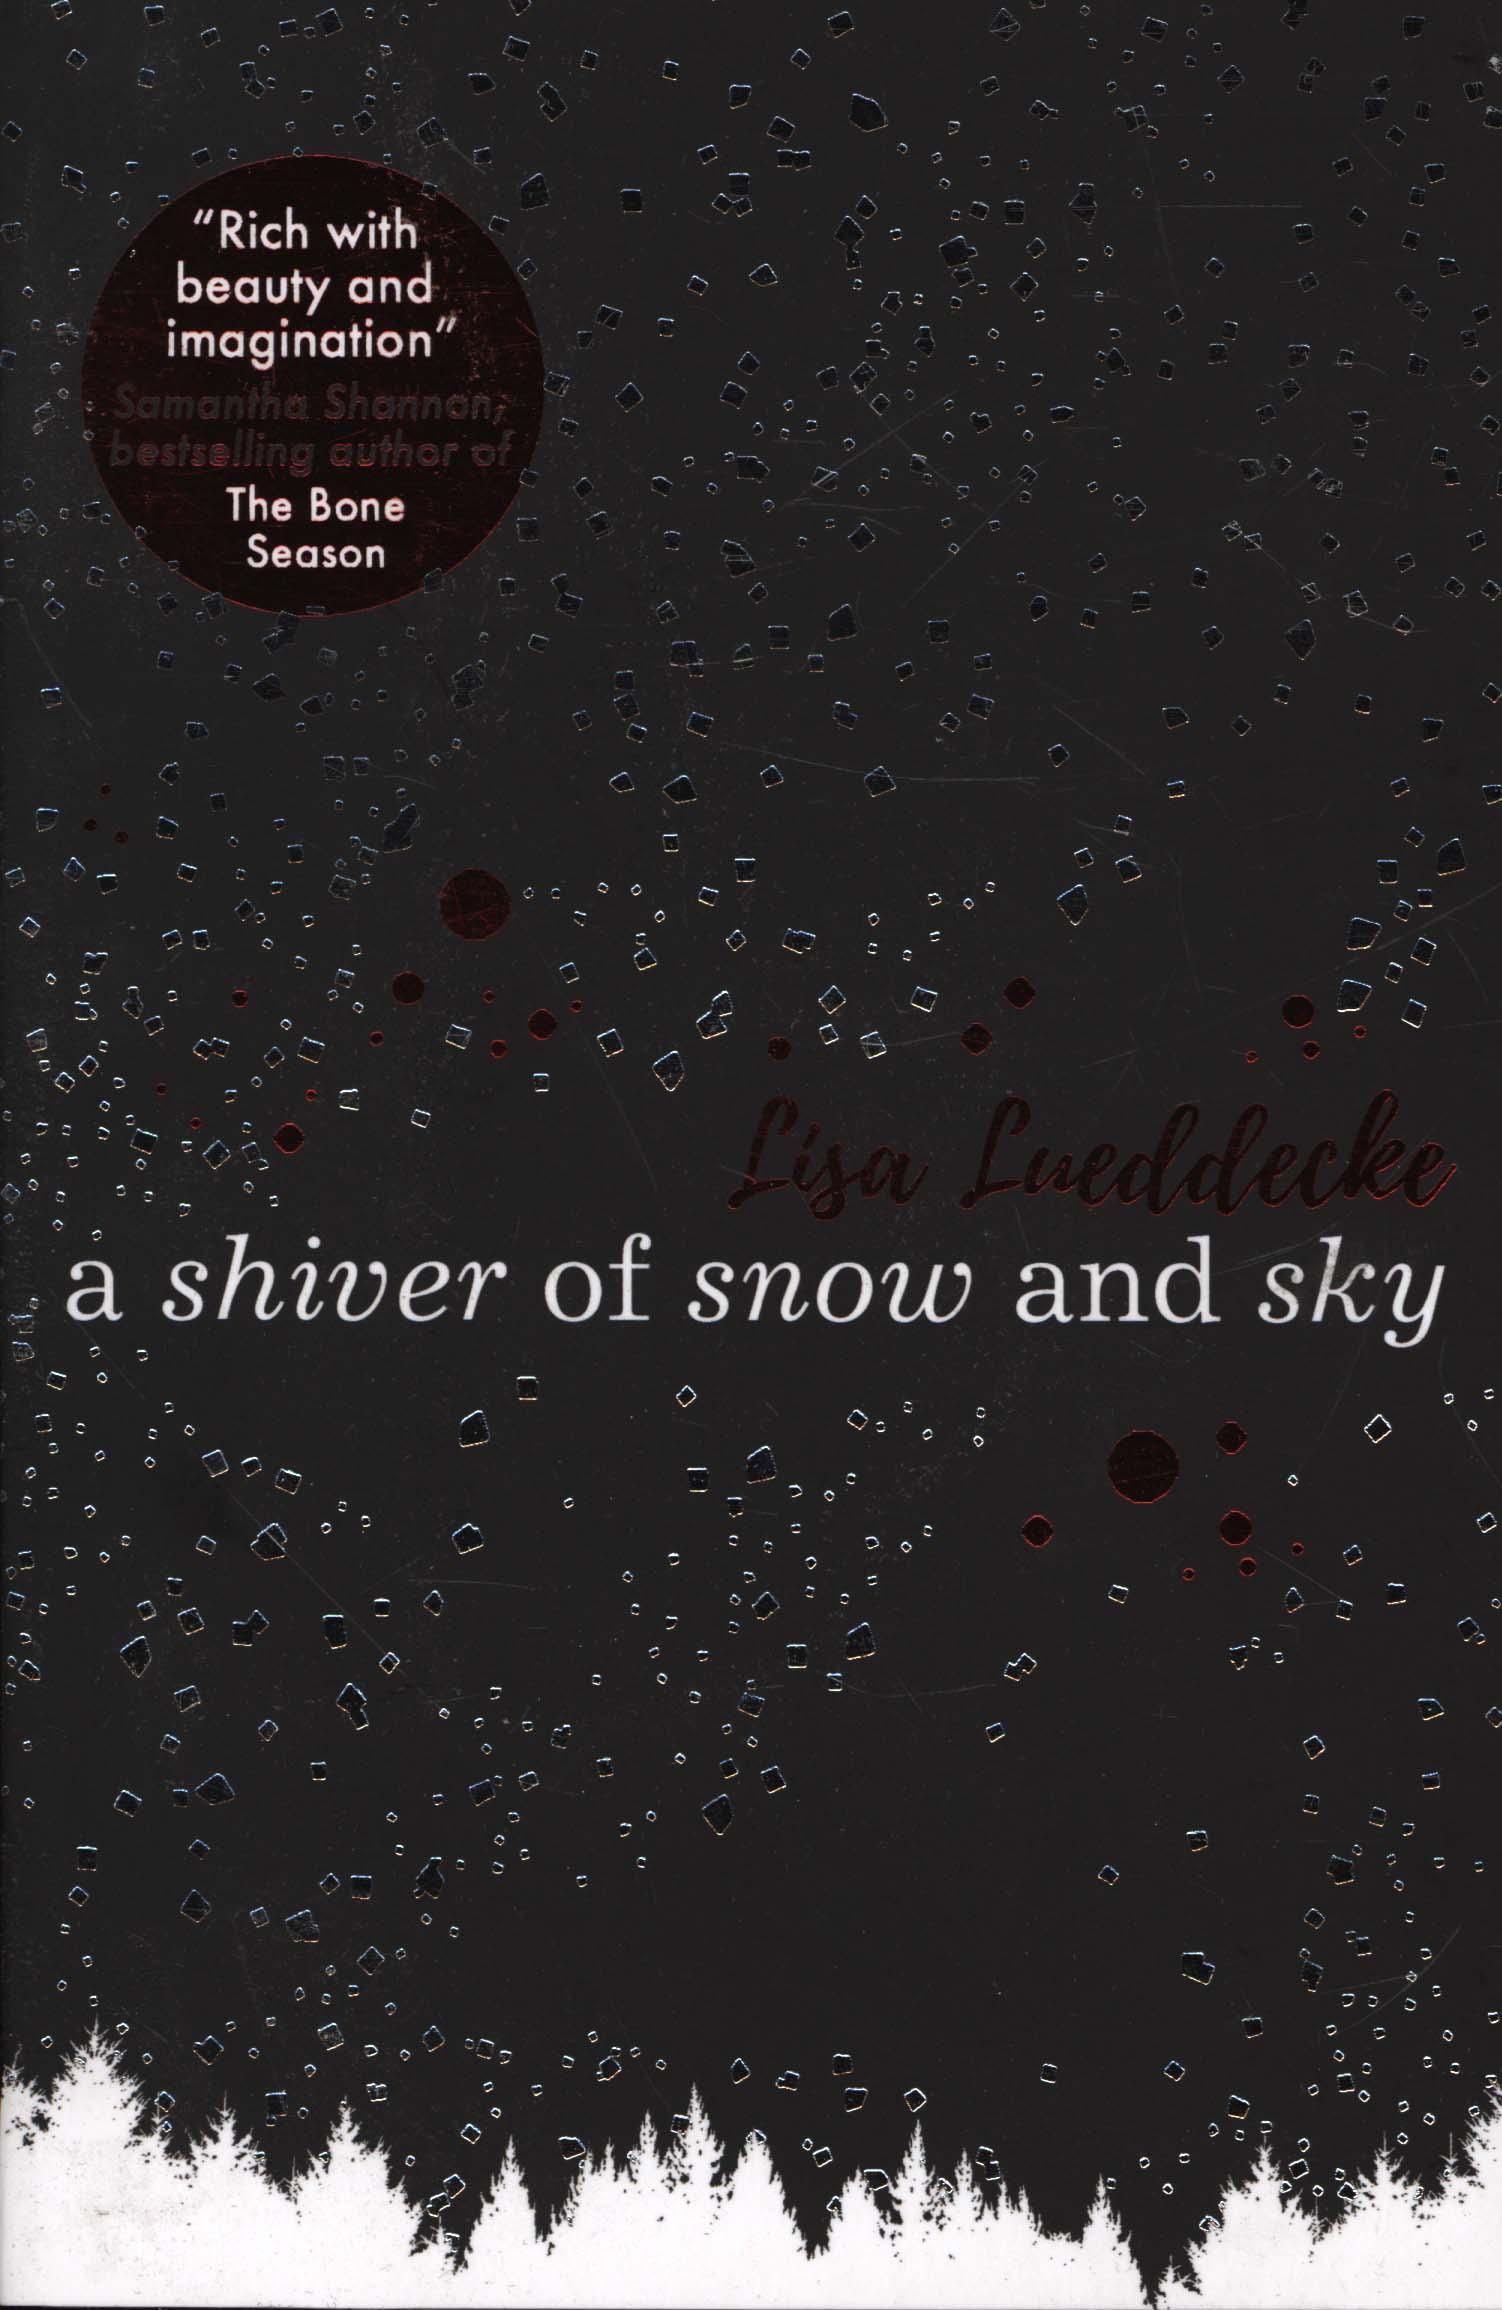 Shiver of Snow and Sky